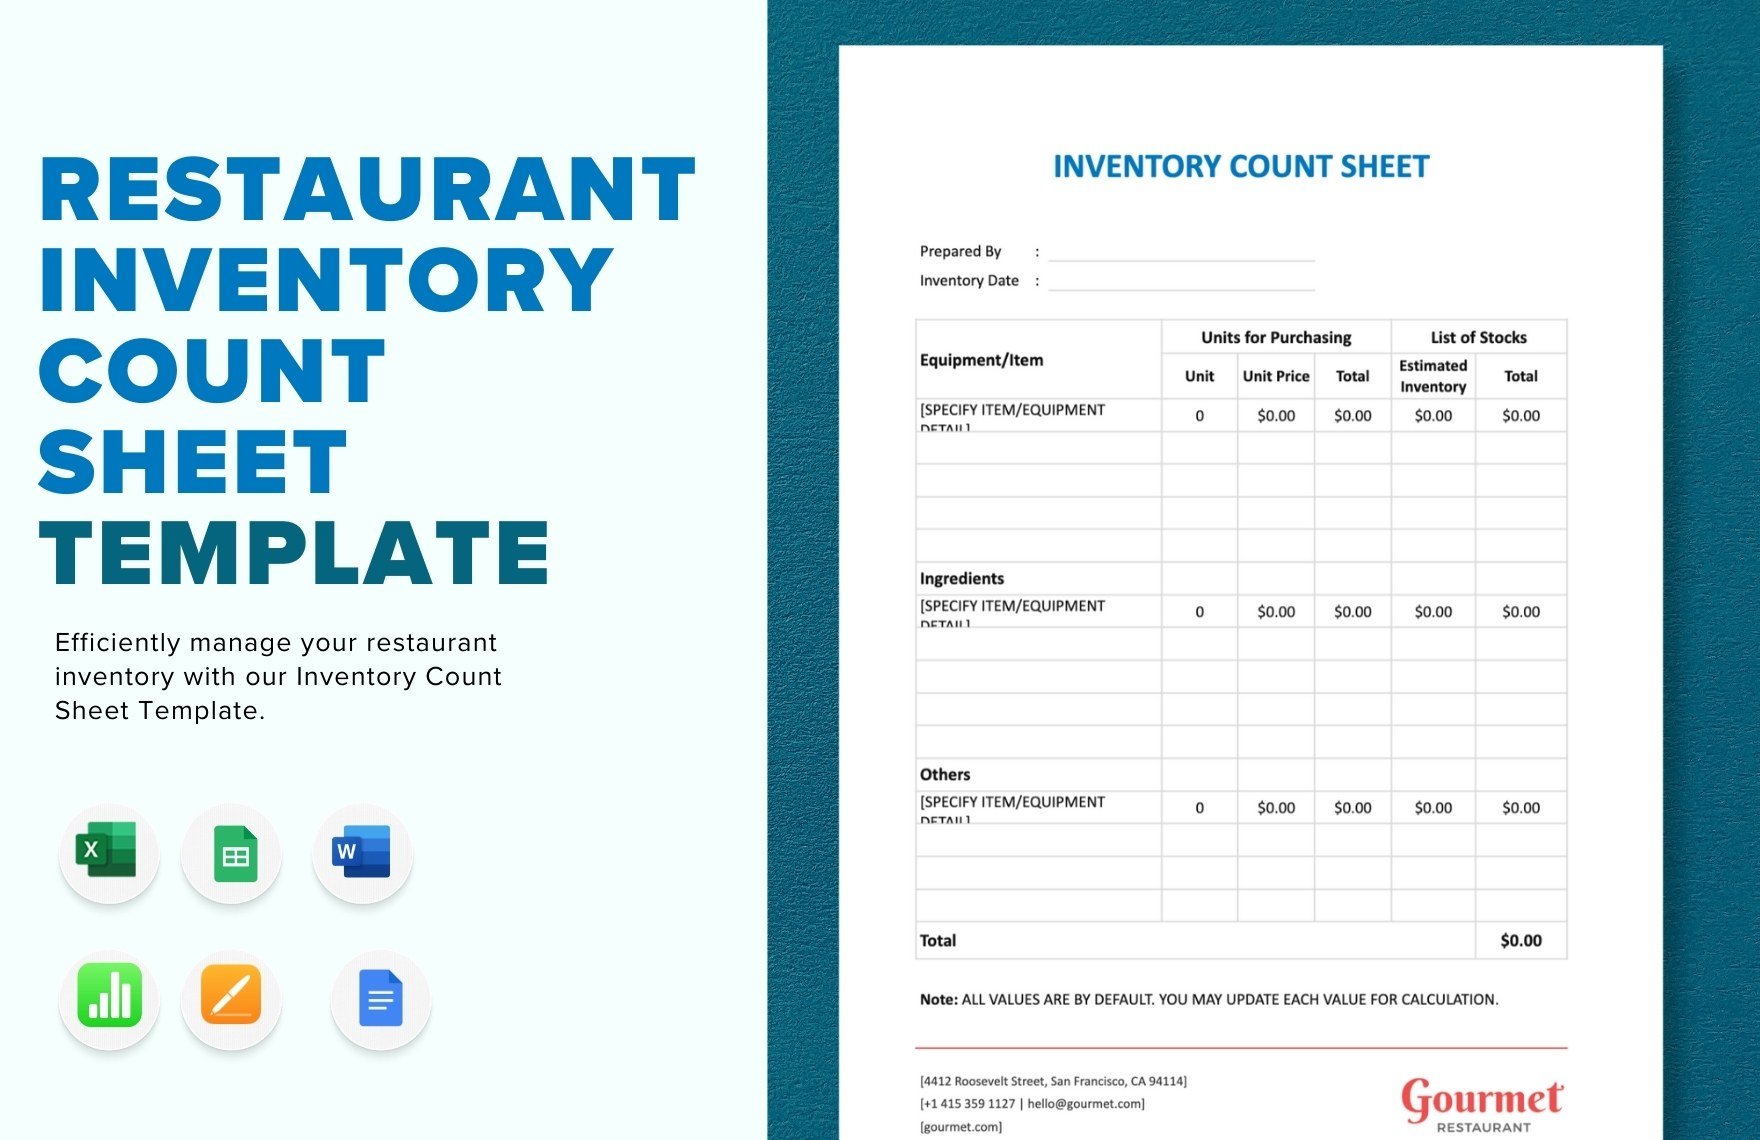 Restaurant Inventory Count Sheet Template